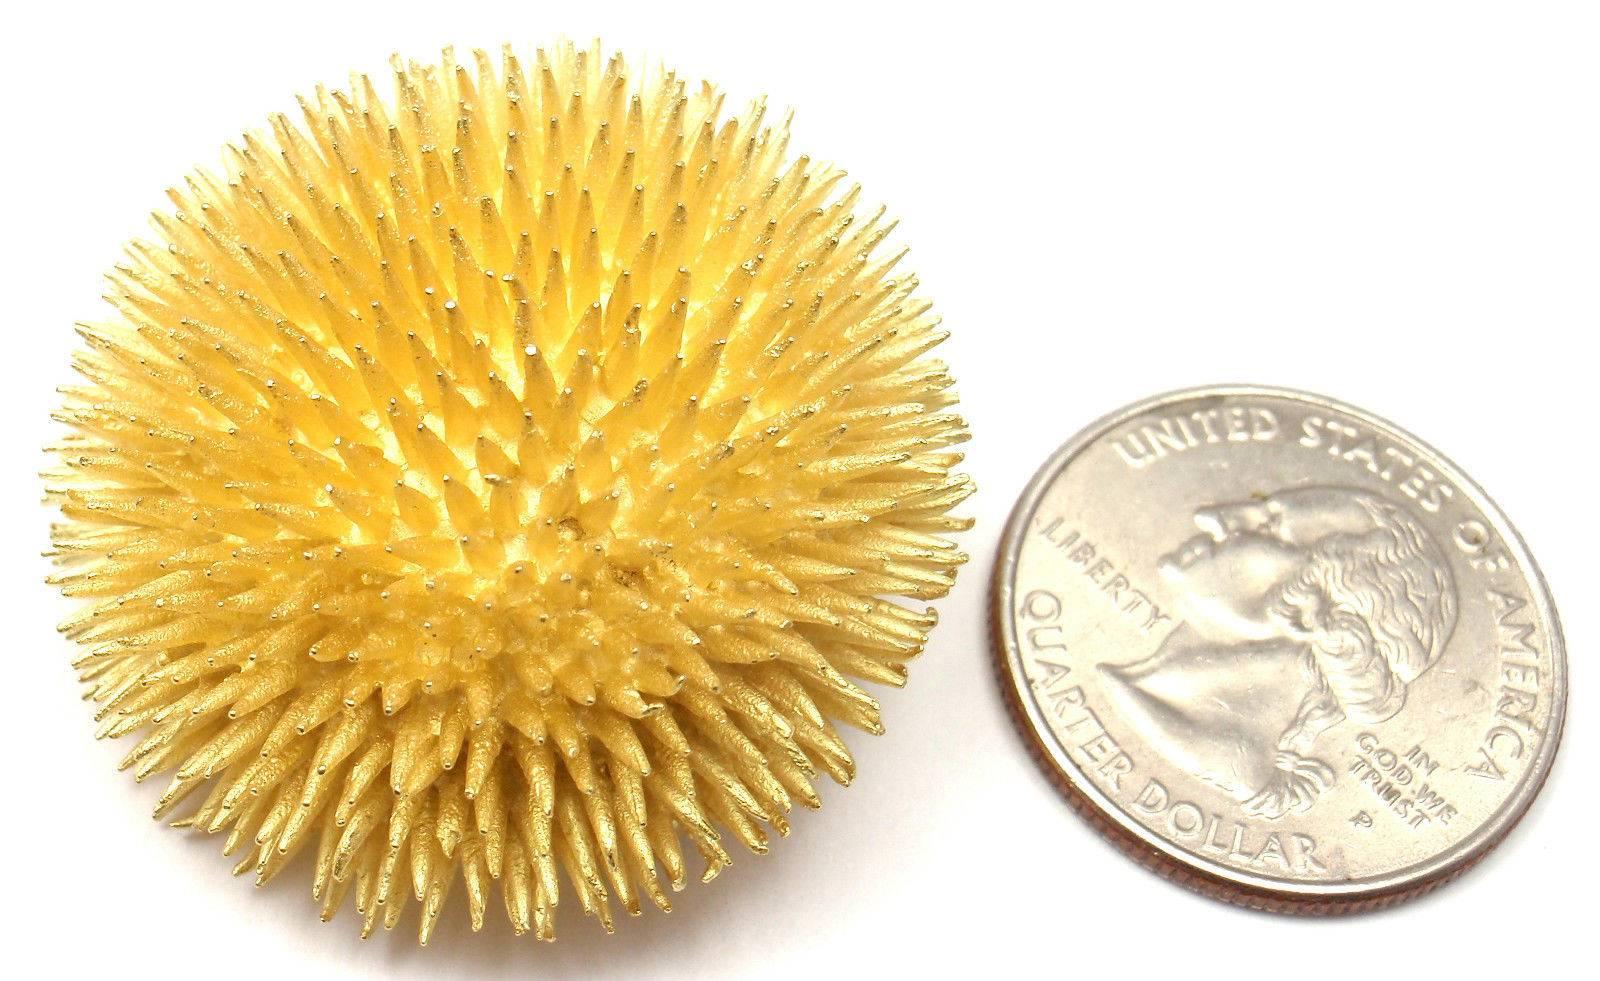 18k Yellow Sea Urchin Extra Large Brooch Pin by Tiffany & Co. 

Details: 
Measurements: 36mm x 19mm
Weight: 28.4 grams
Stamped Hallmarks: Tiffany & Co 18k
*Free Shipping within the United States*

YOUR PRICE: $3,850

T445mned